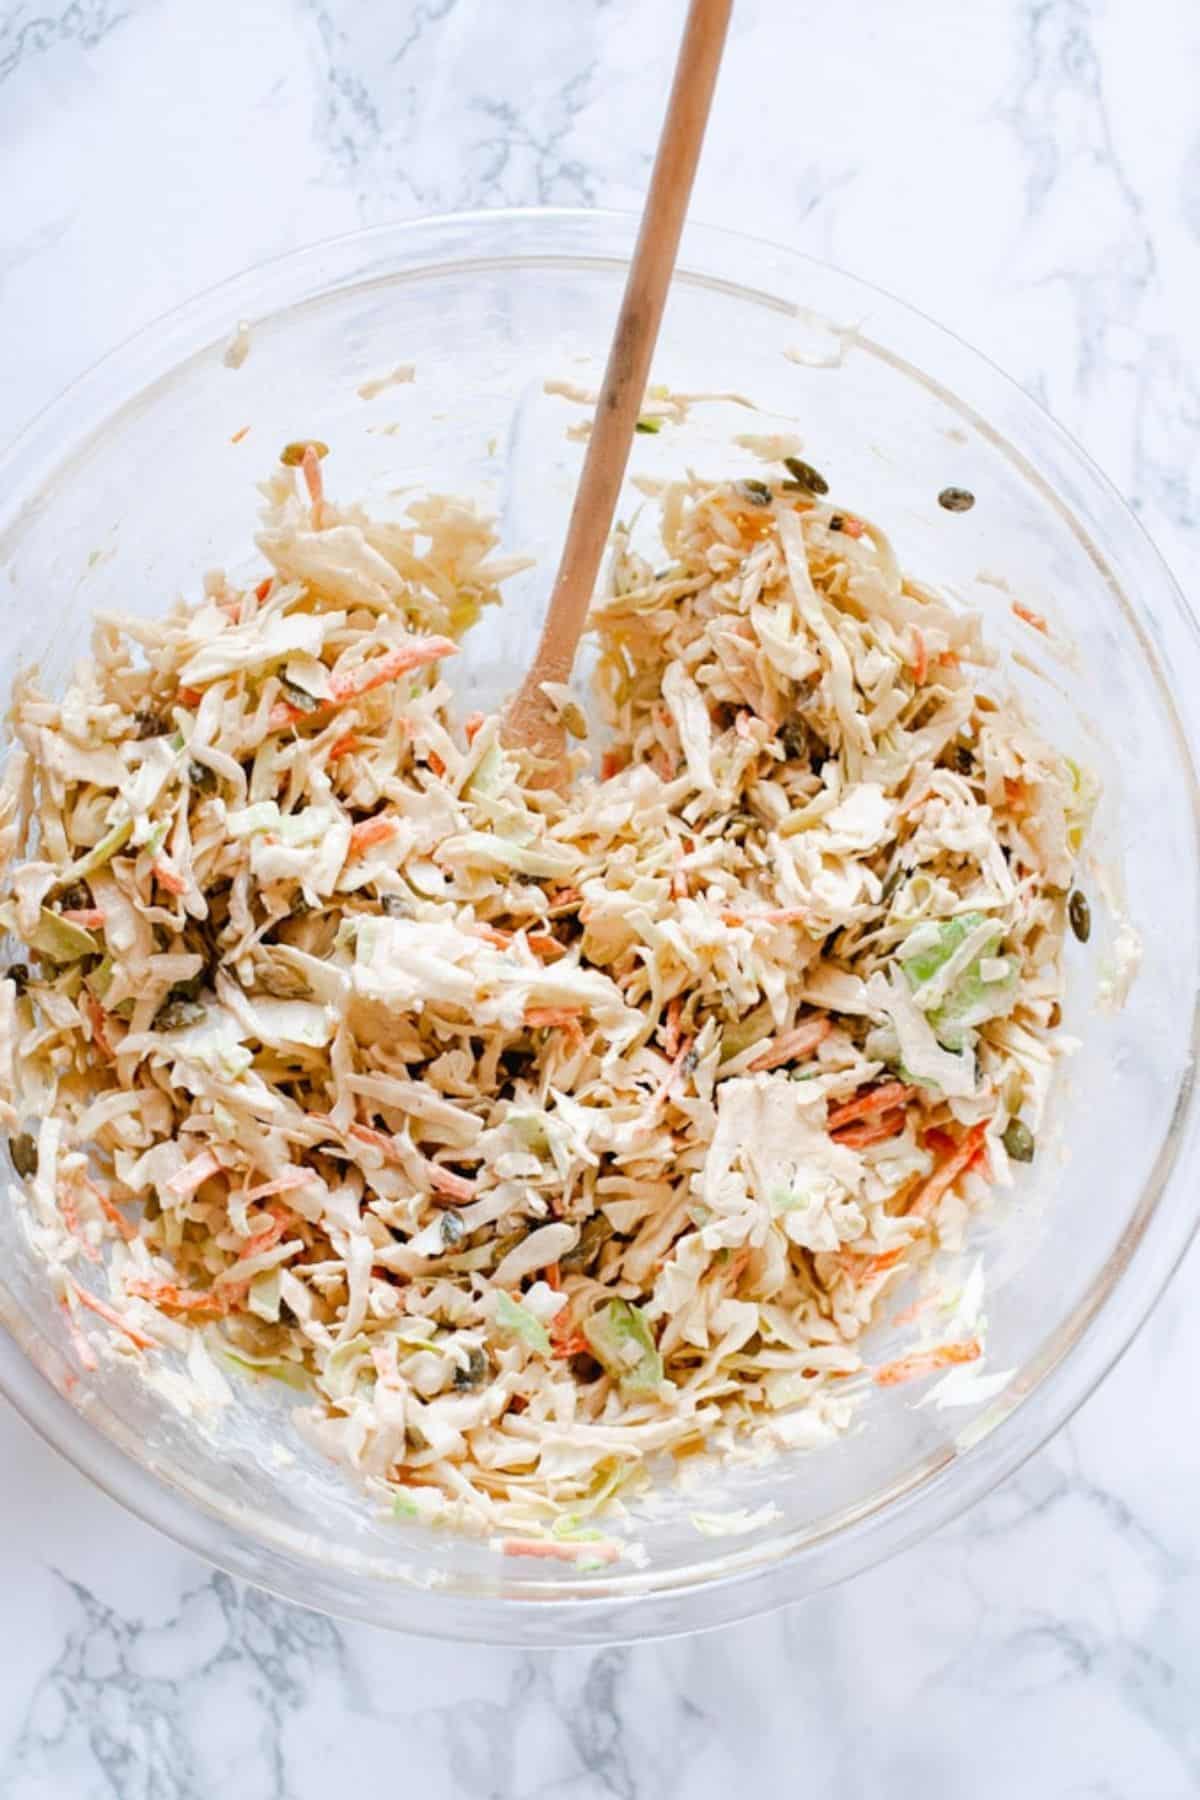 Tahini coleslaw in a large glass bowl on a marble background. A wooden spoon is resting in the bowl.